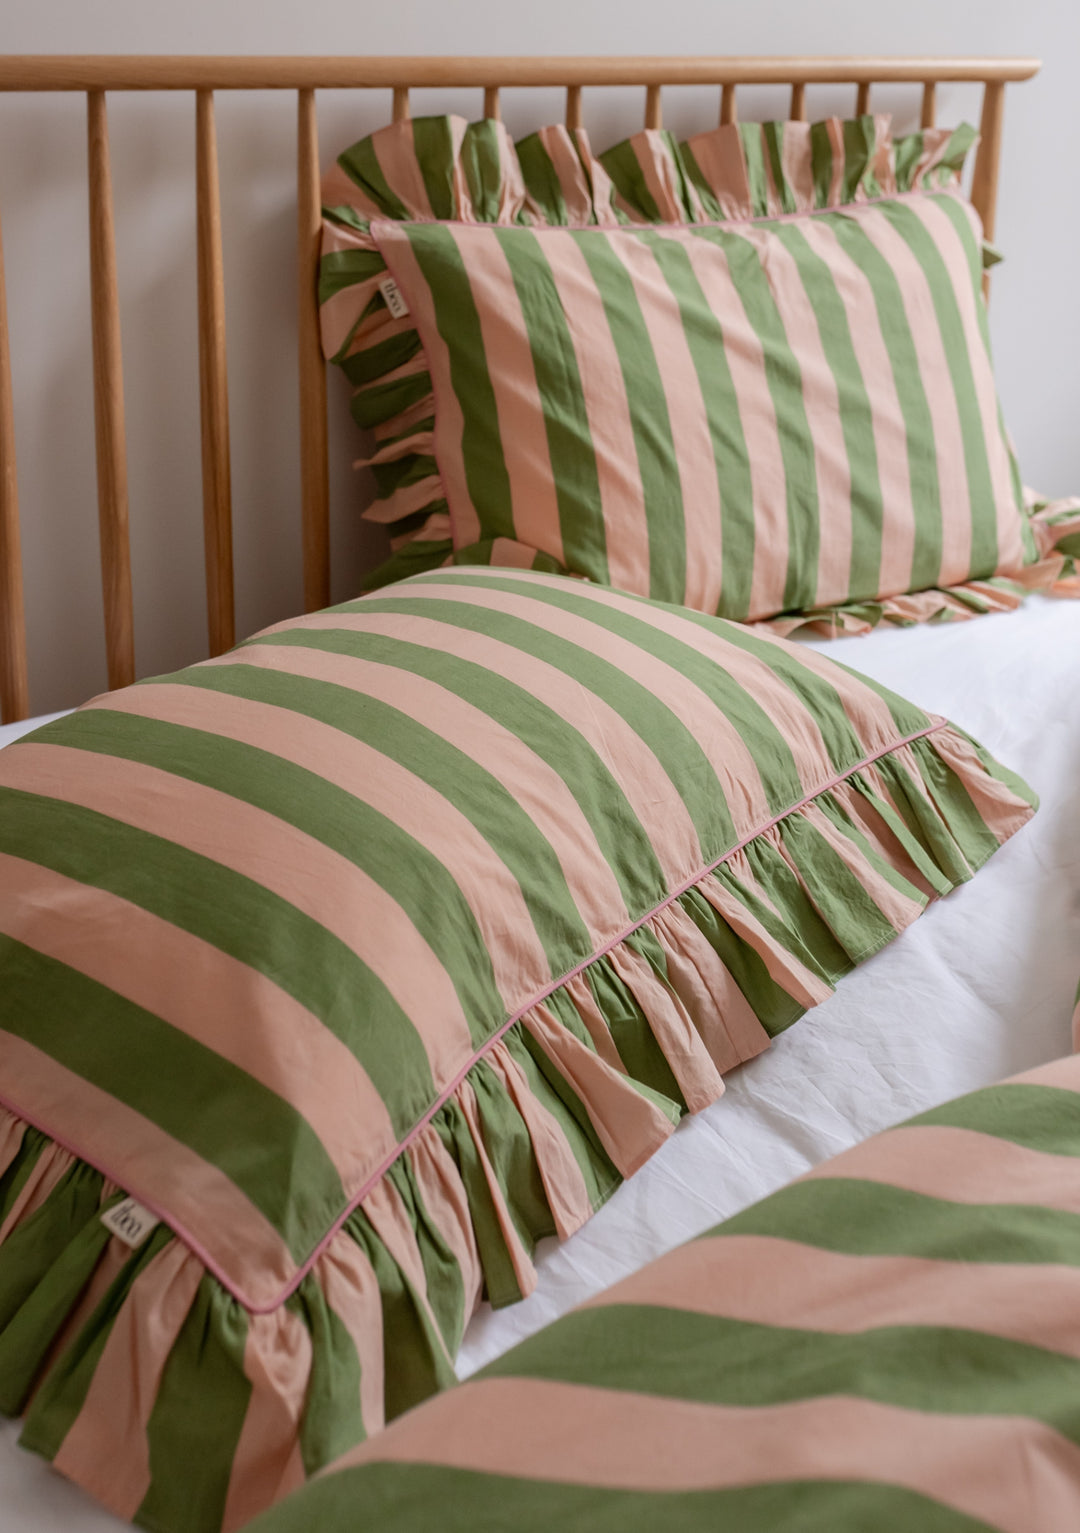 Pair of Cotton Pillowcases in Green Stripe